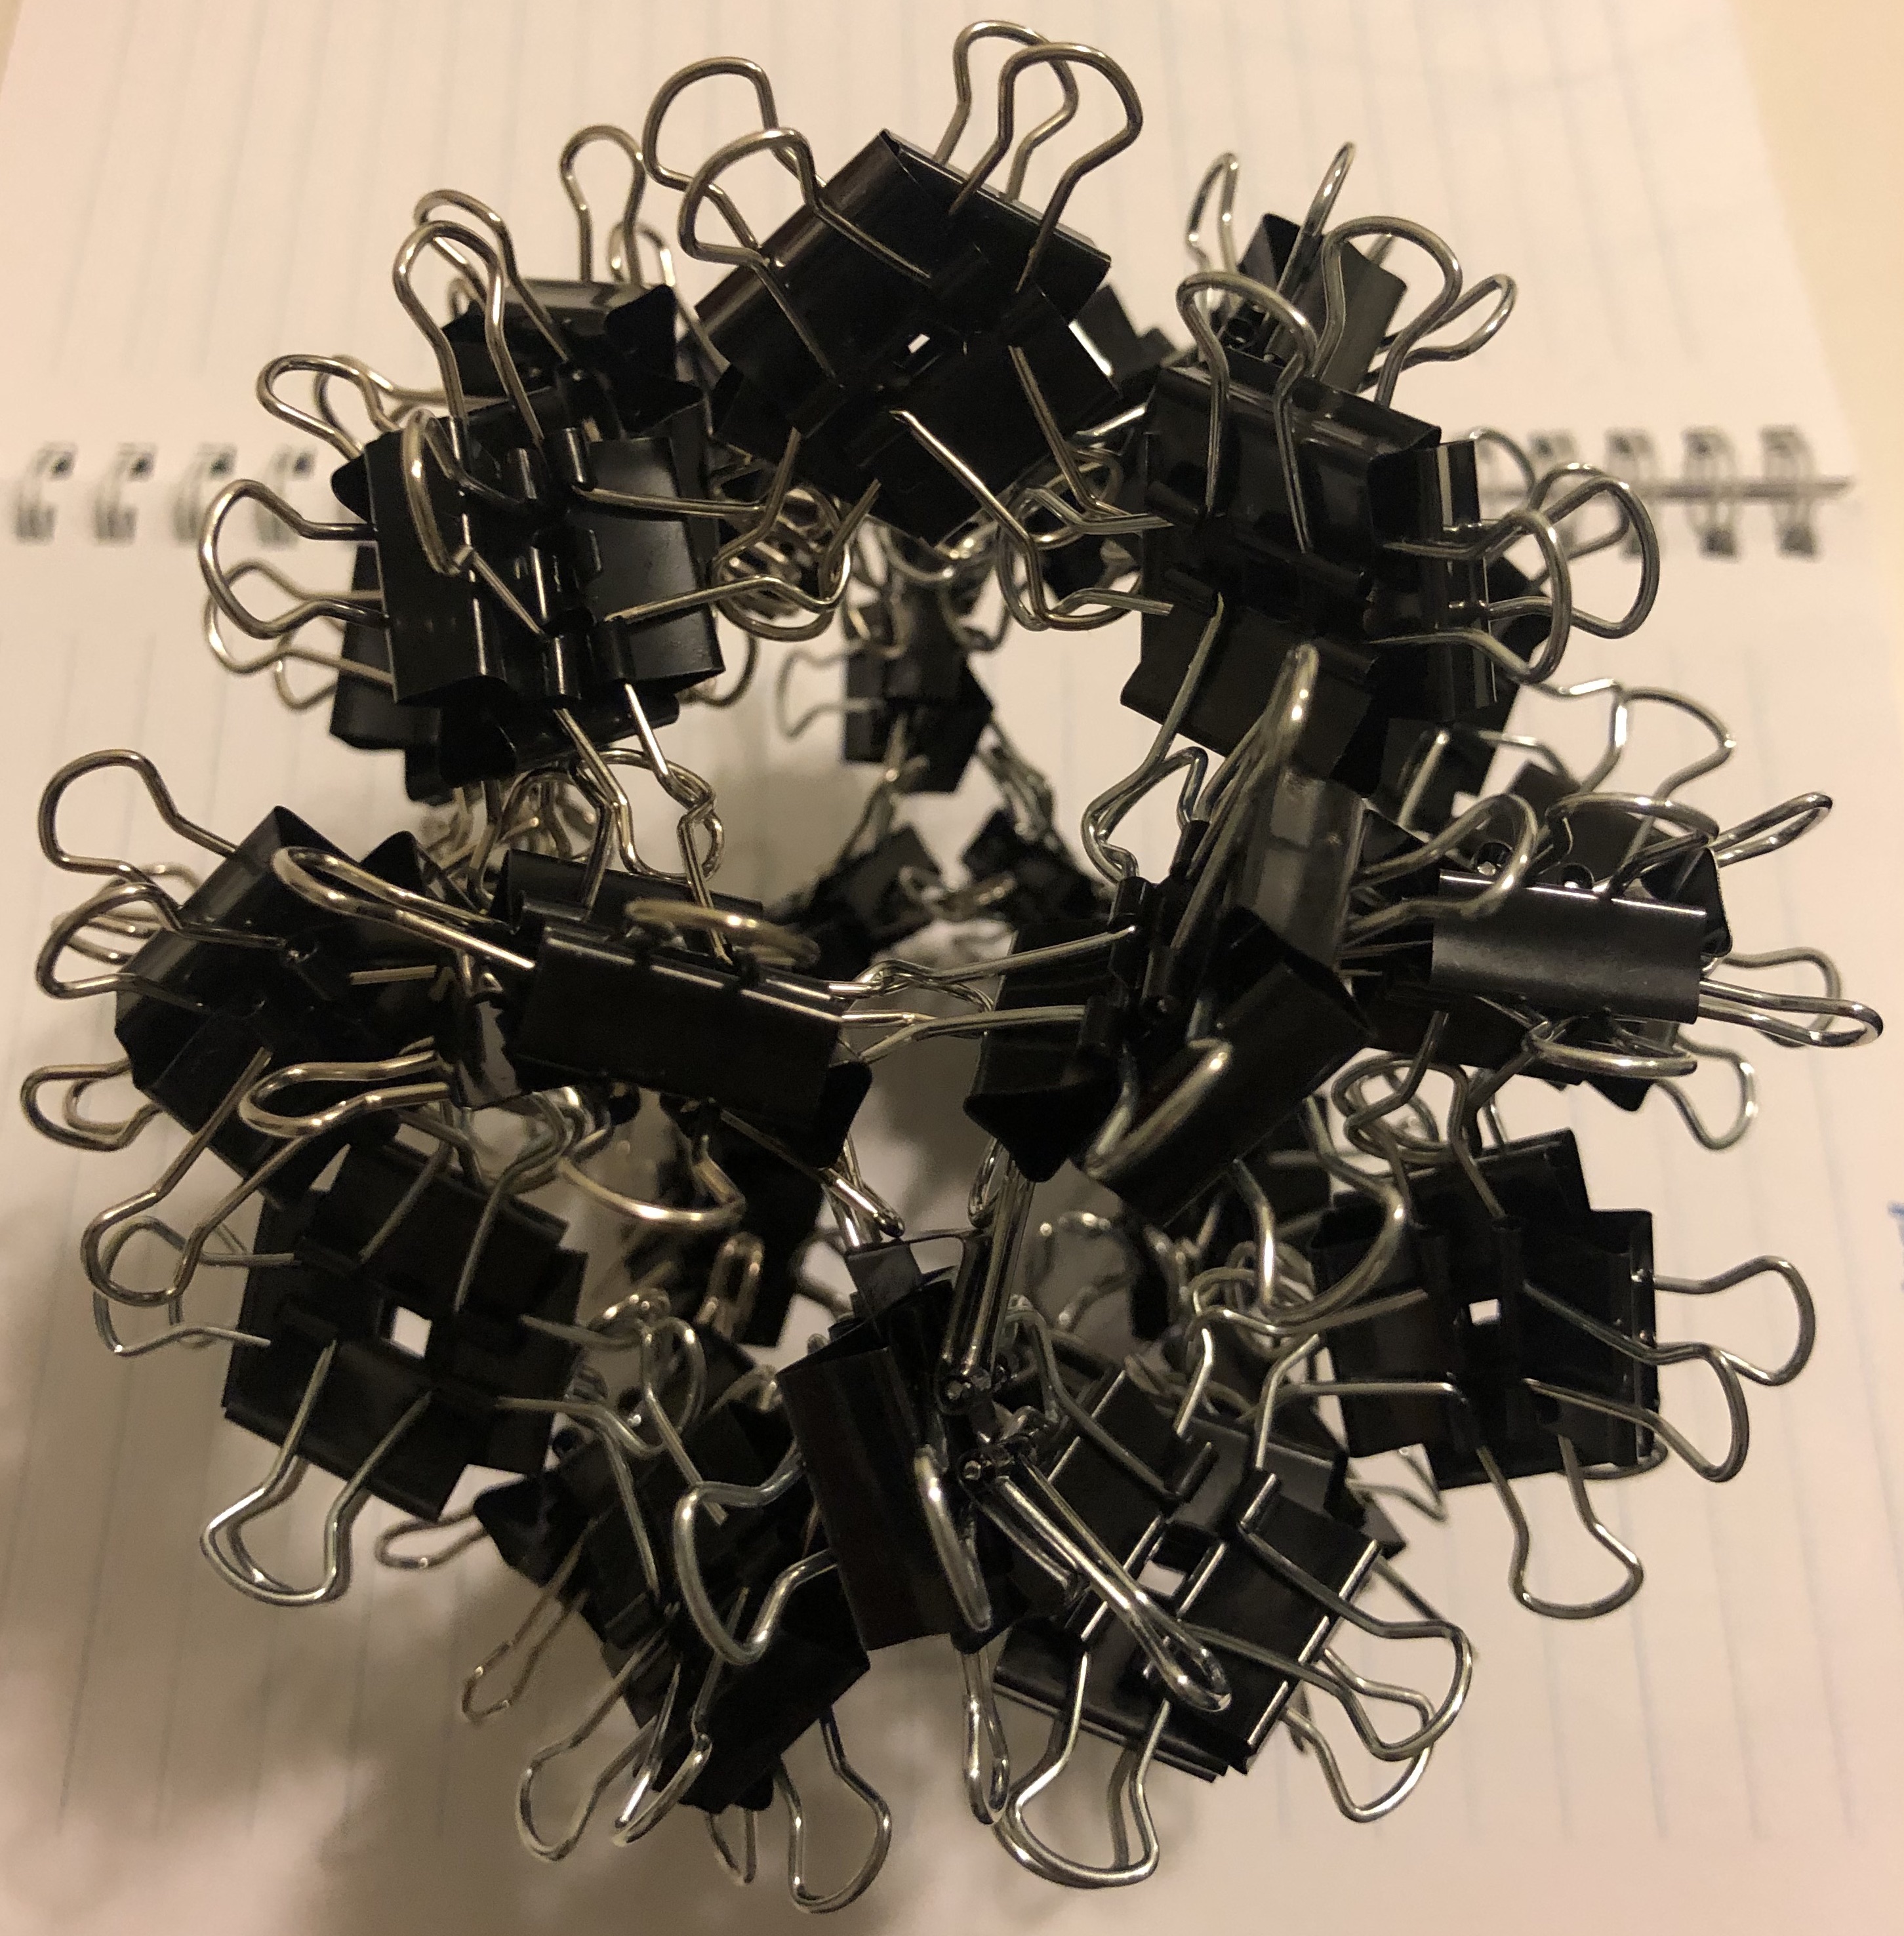 120 clips forming 30 H-edges forming dodecahedron